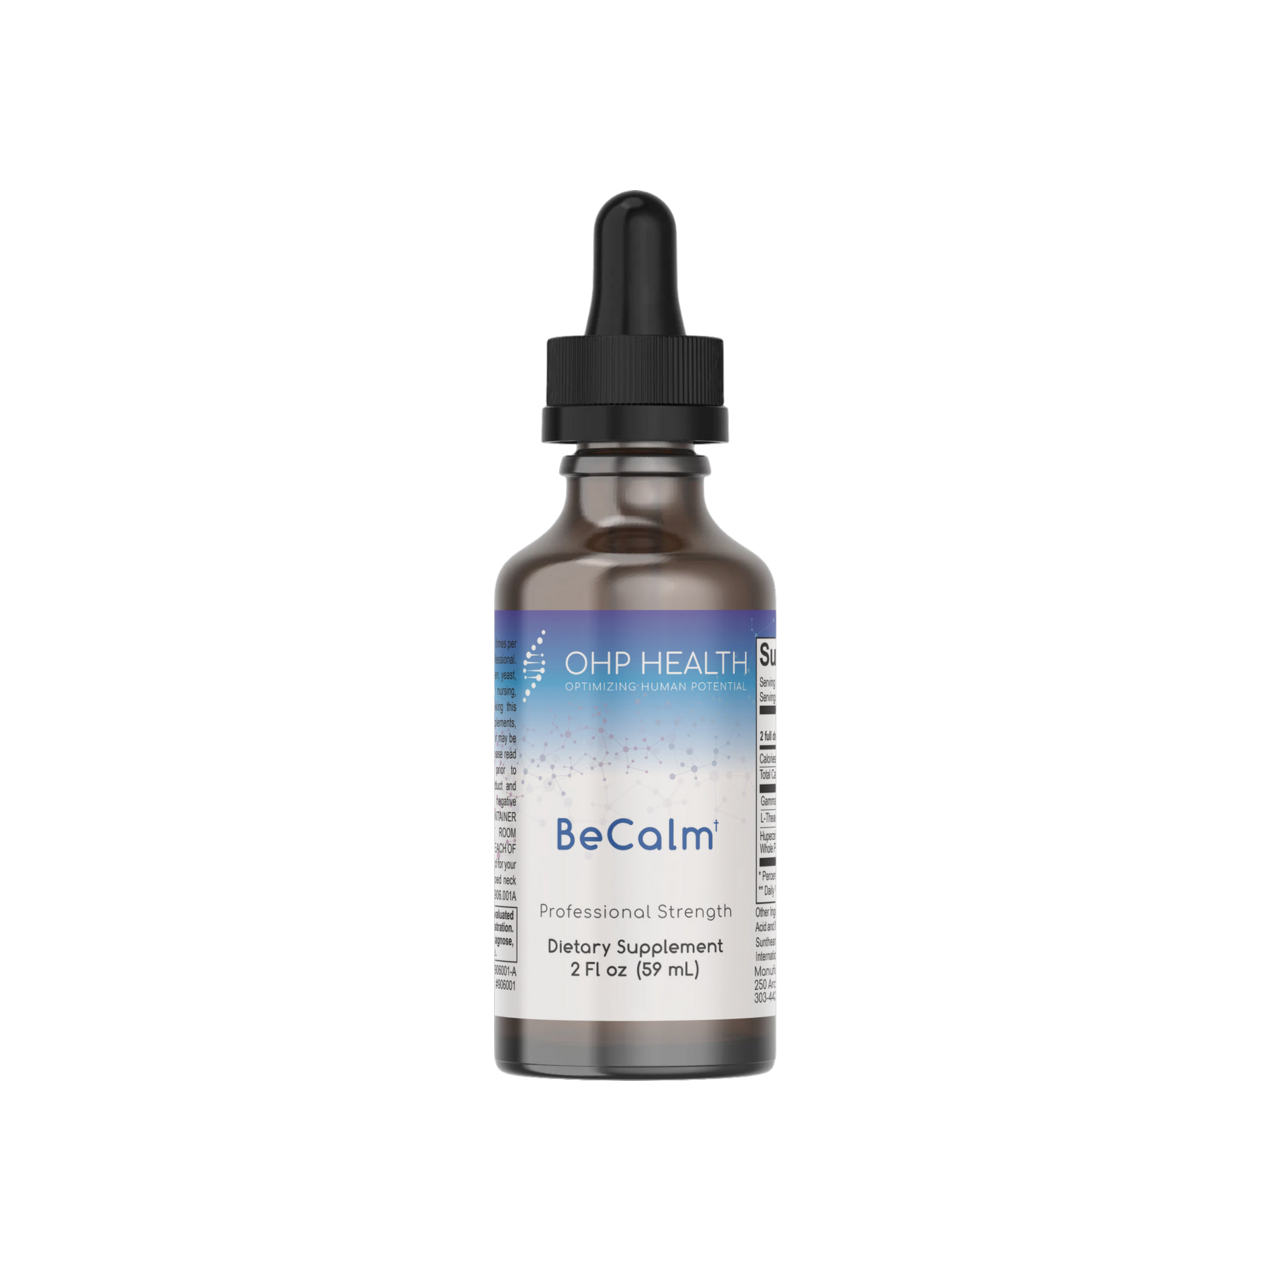 A bottle of BeCalm CBD oil by OHP Health on a black background.